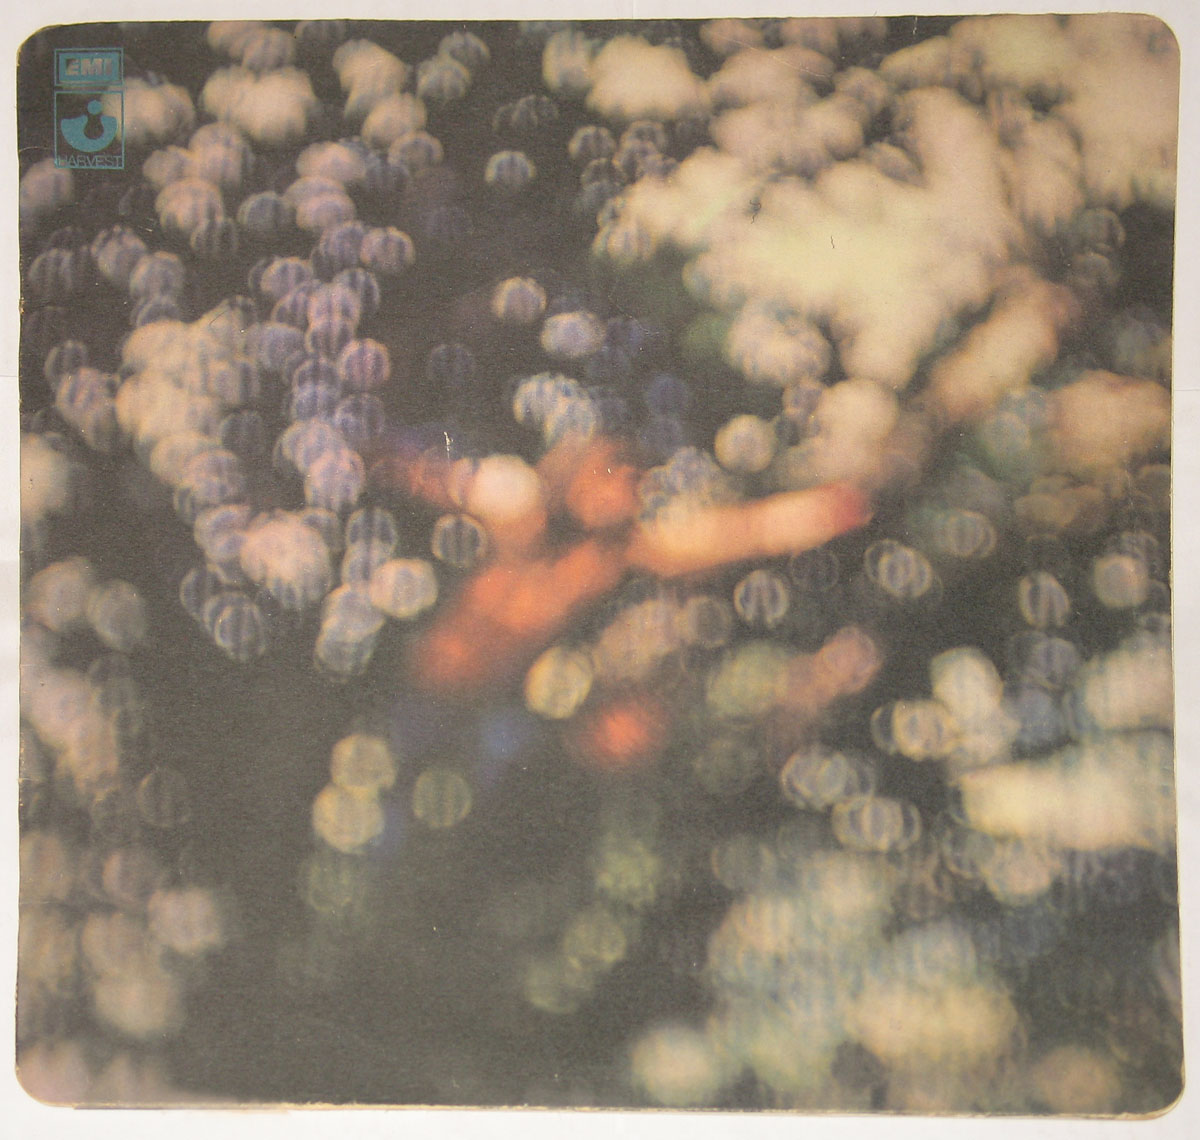 PINK FLOYD Obscured by Clouds UK Pressing Album Cover Gallery & 12 ...